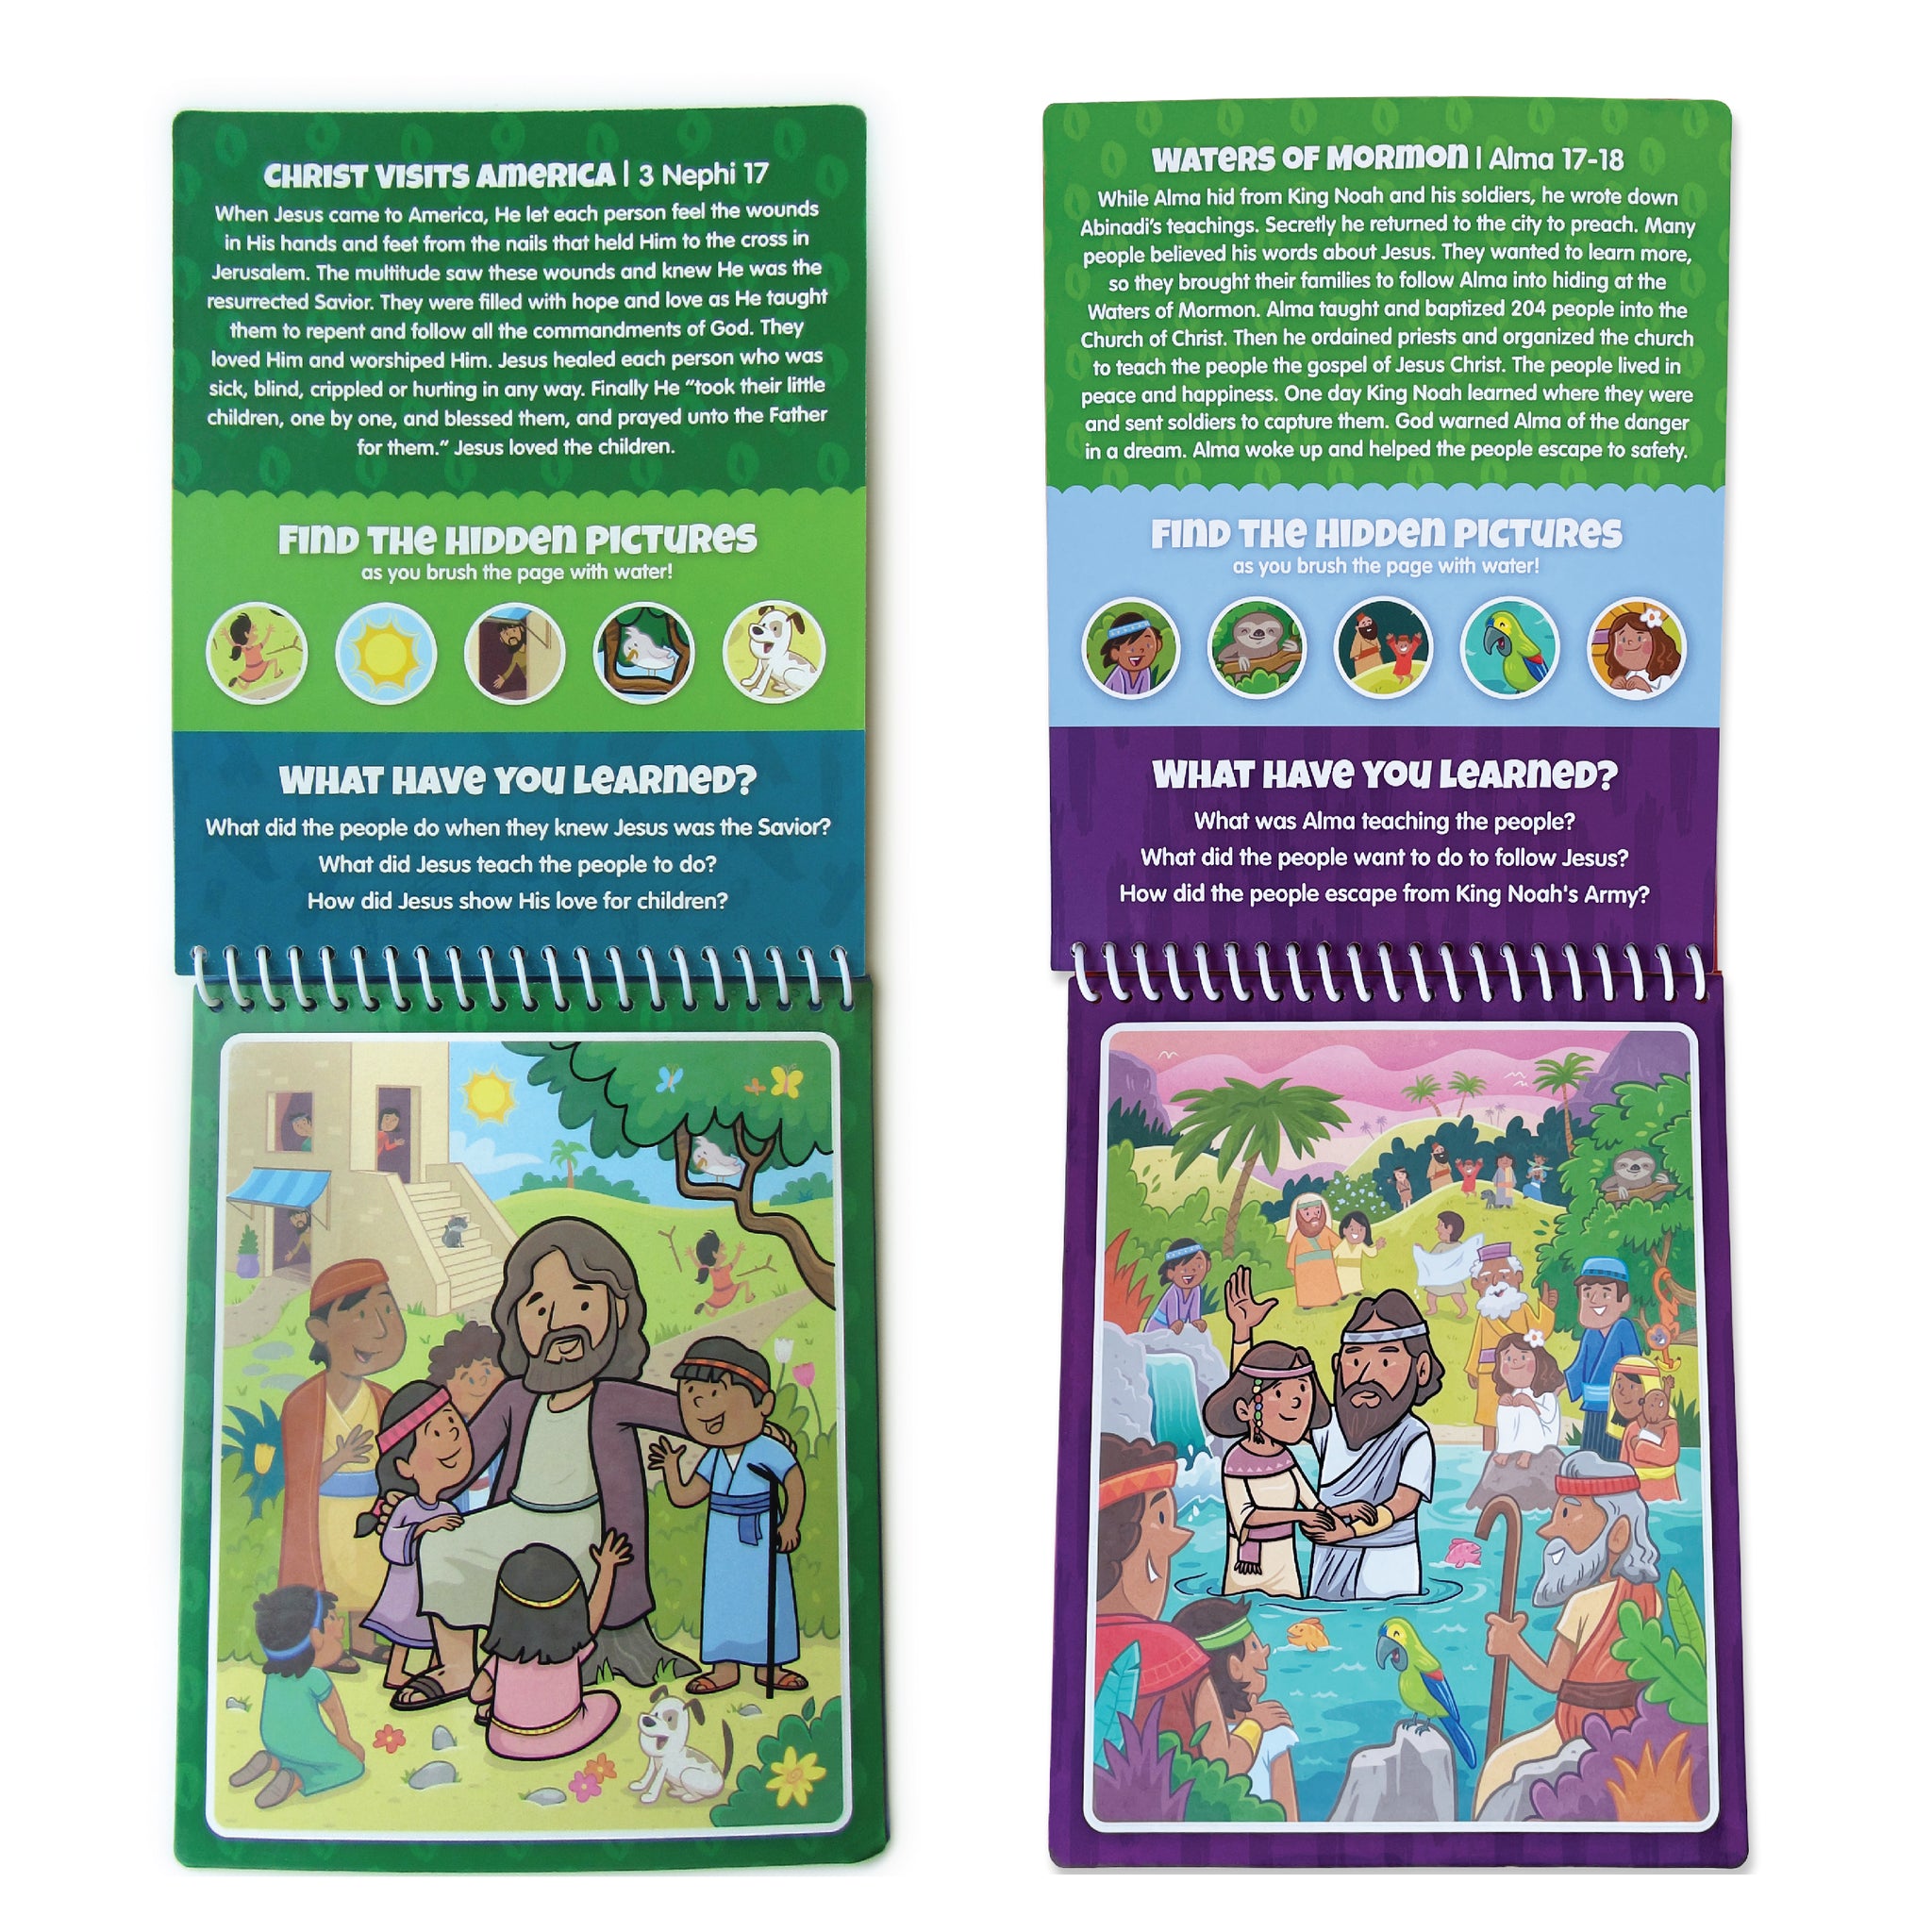 Scripture Search and Spell Book of Mormon Version (Game) Scripture